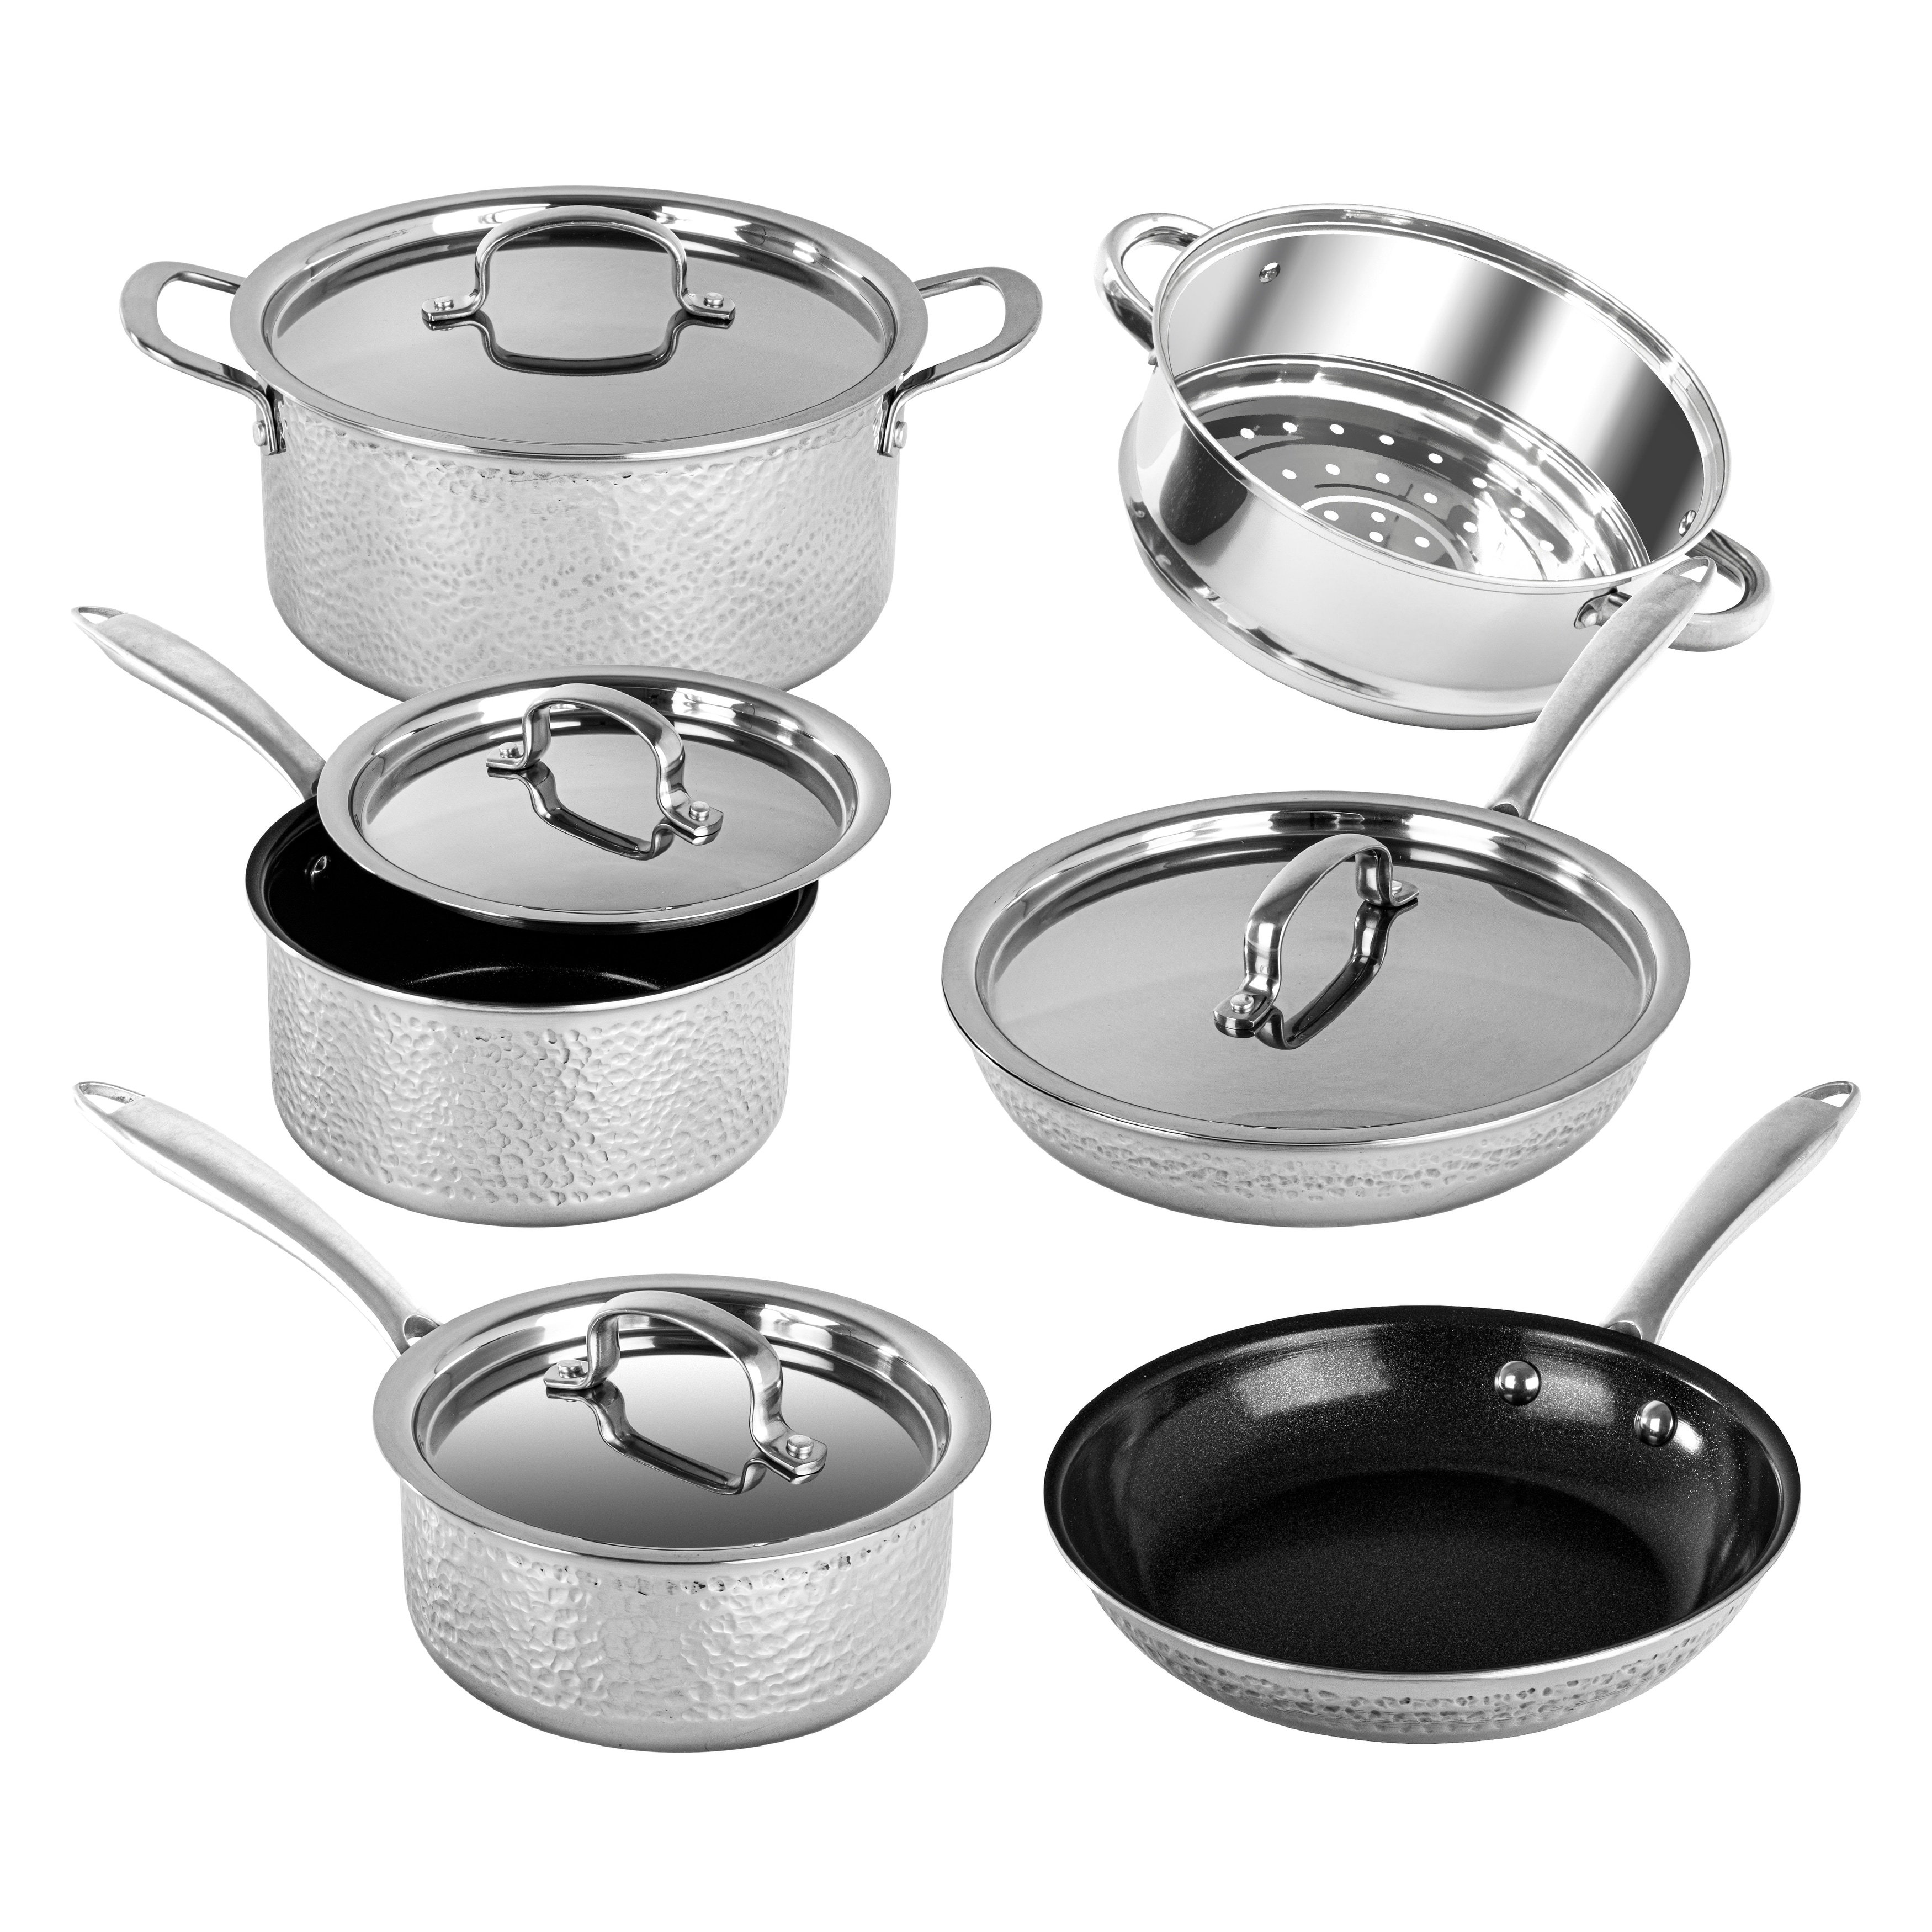 Blue Jean Chef 6-pc Tri-ply Hammered Stainless Steel Cookware Set